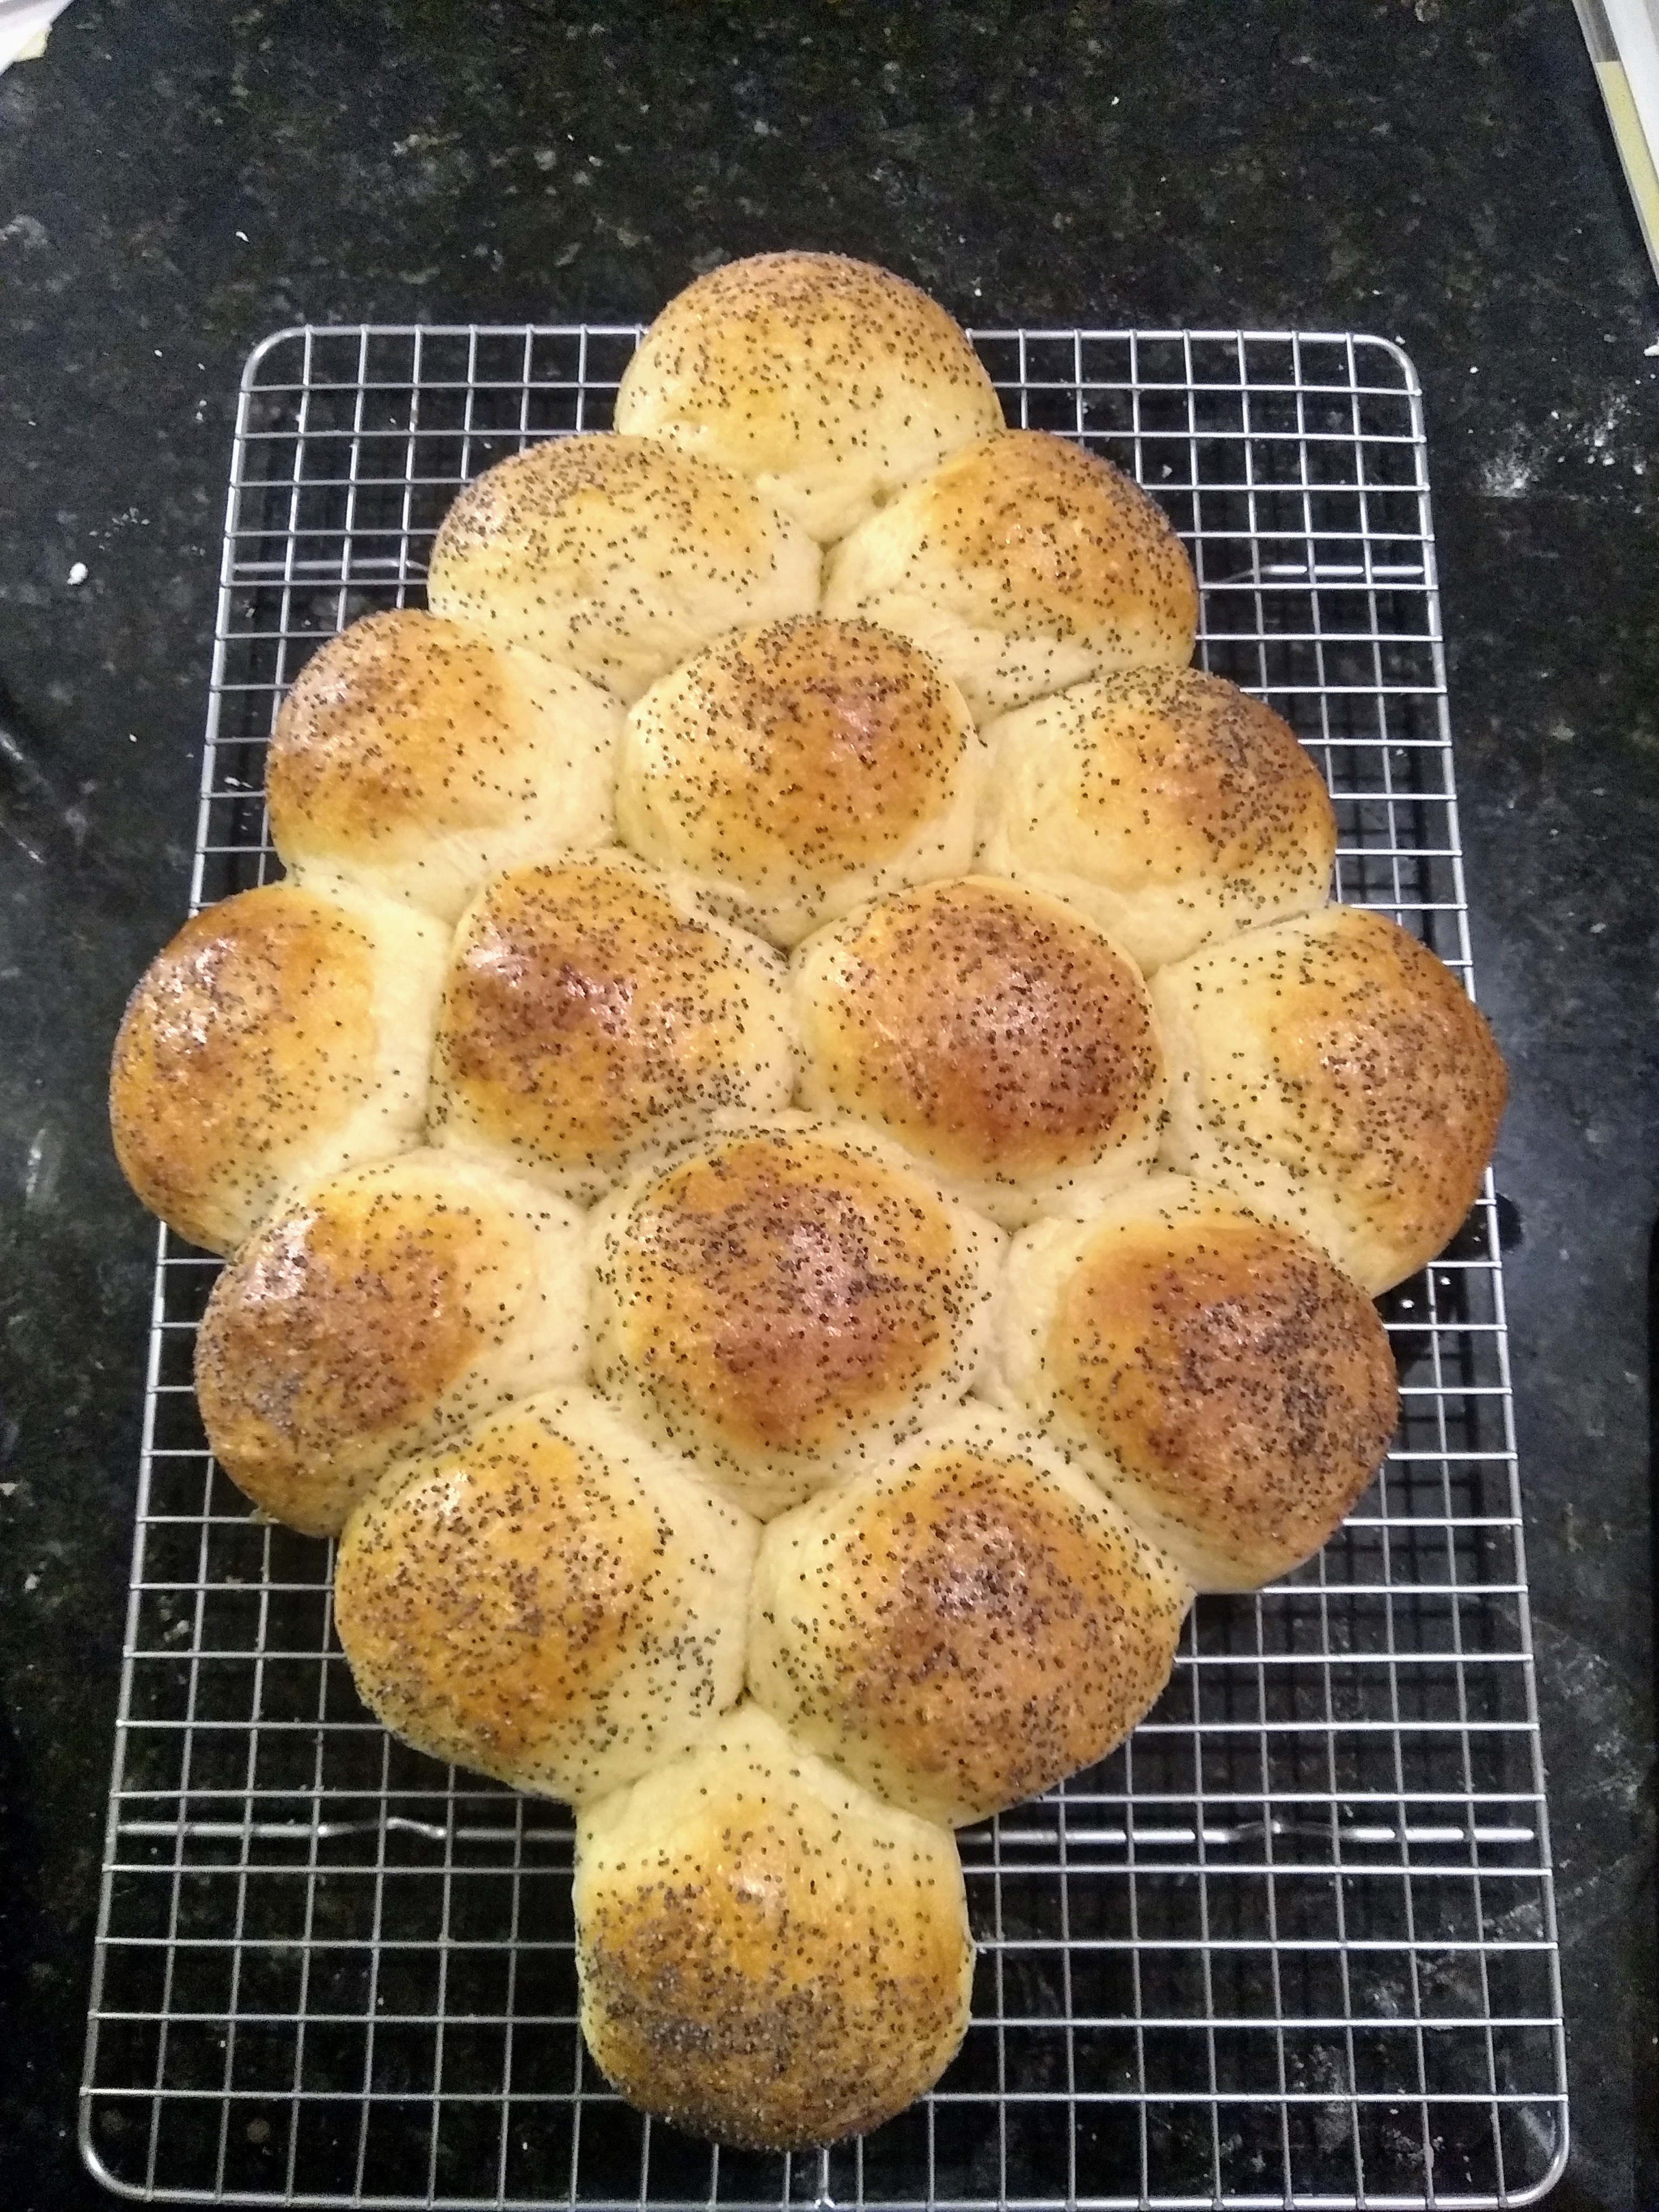 A completed sharable loaf of dinner rolls.